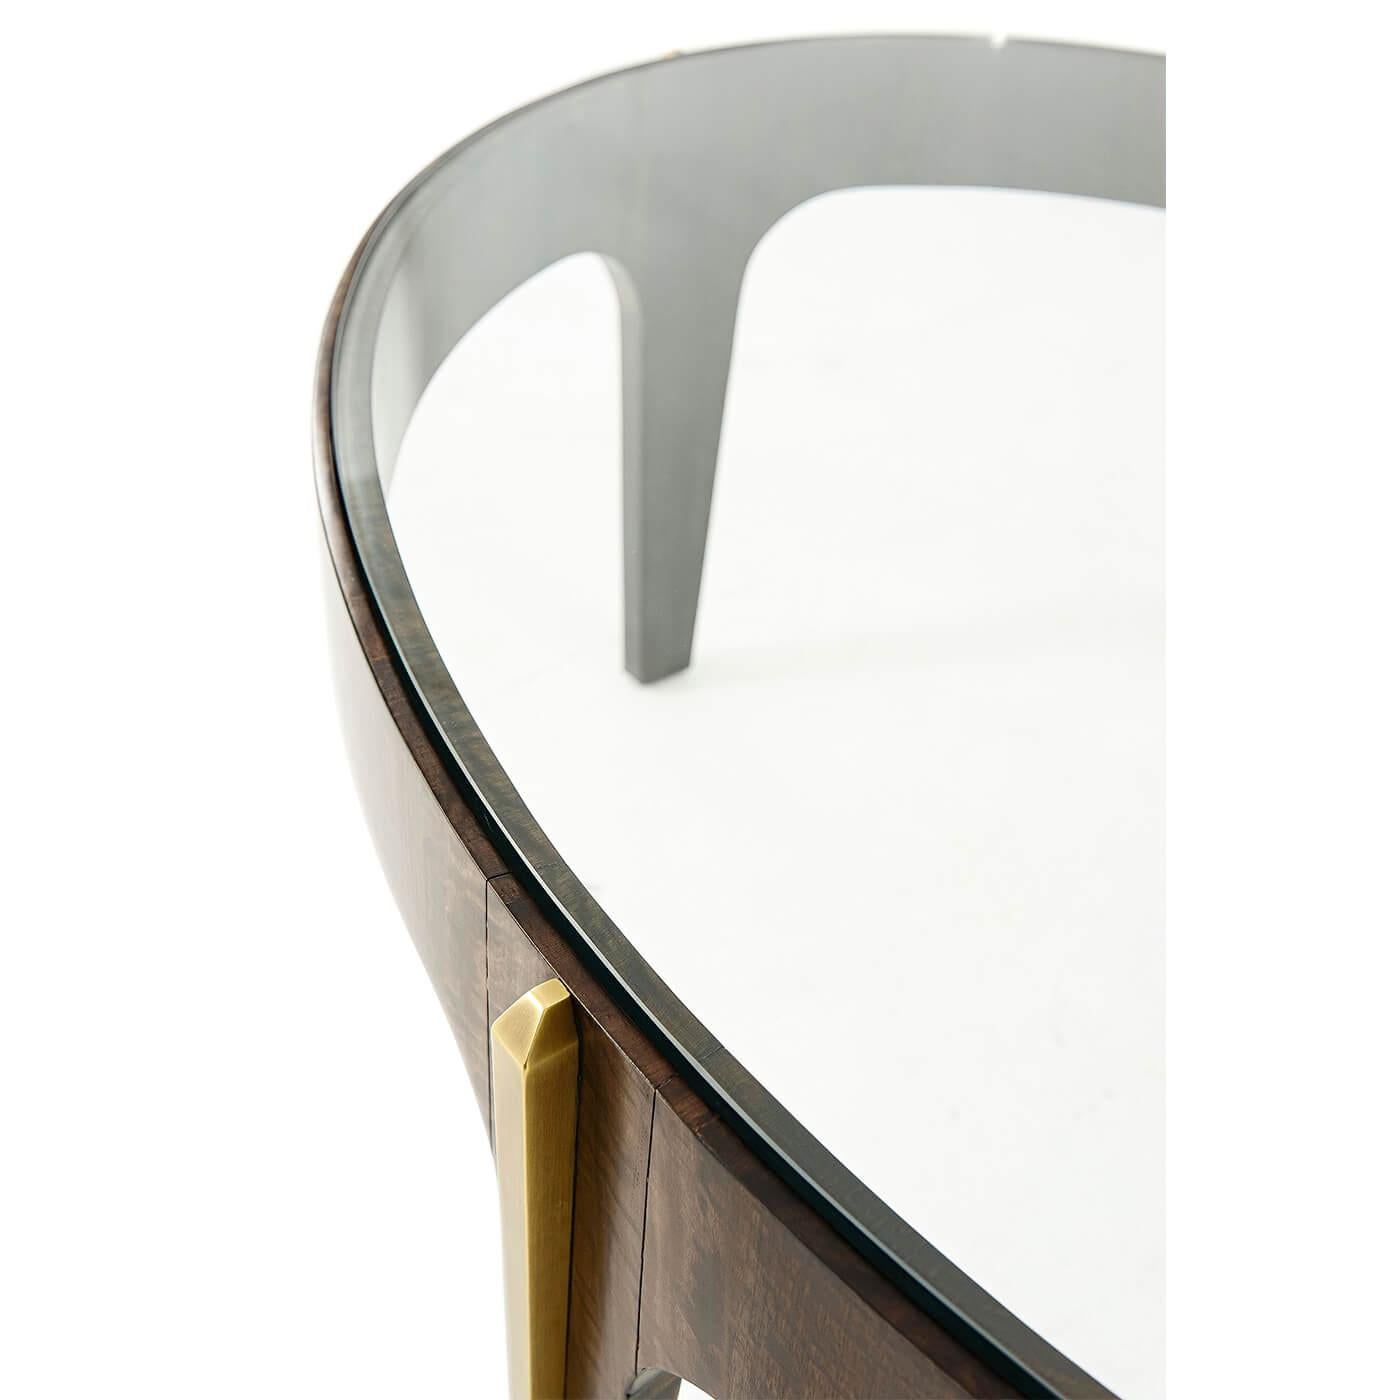 An Art Deco style oval brass mounted cocktail table, the oval tempered glass inset top within a bold veneered frieze, the gently tapered legs with bold brass moldings. 

Dimensions: 48